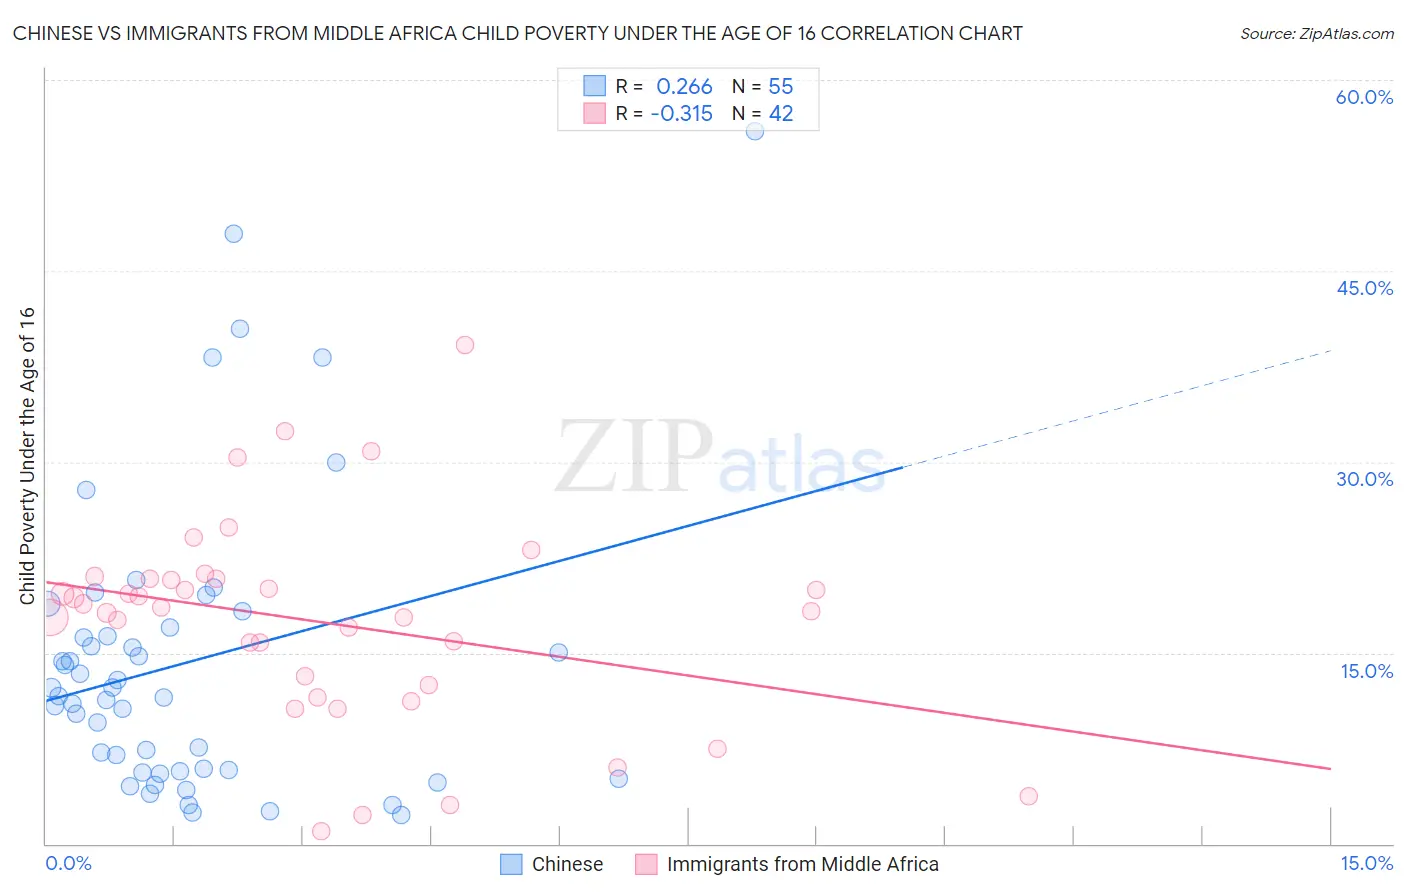 Chinese vs Immigrants from Middle Africa Child Poverty Under the Age of 16